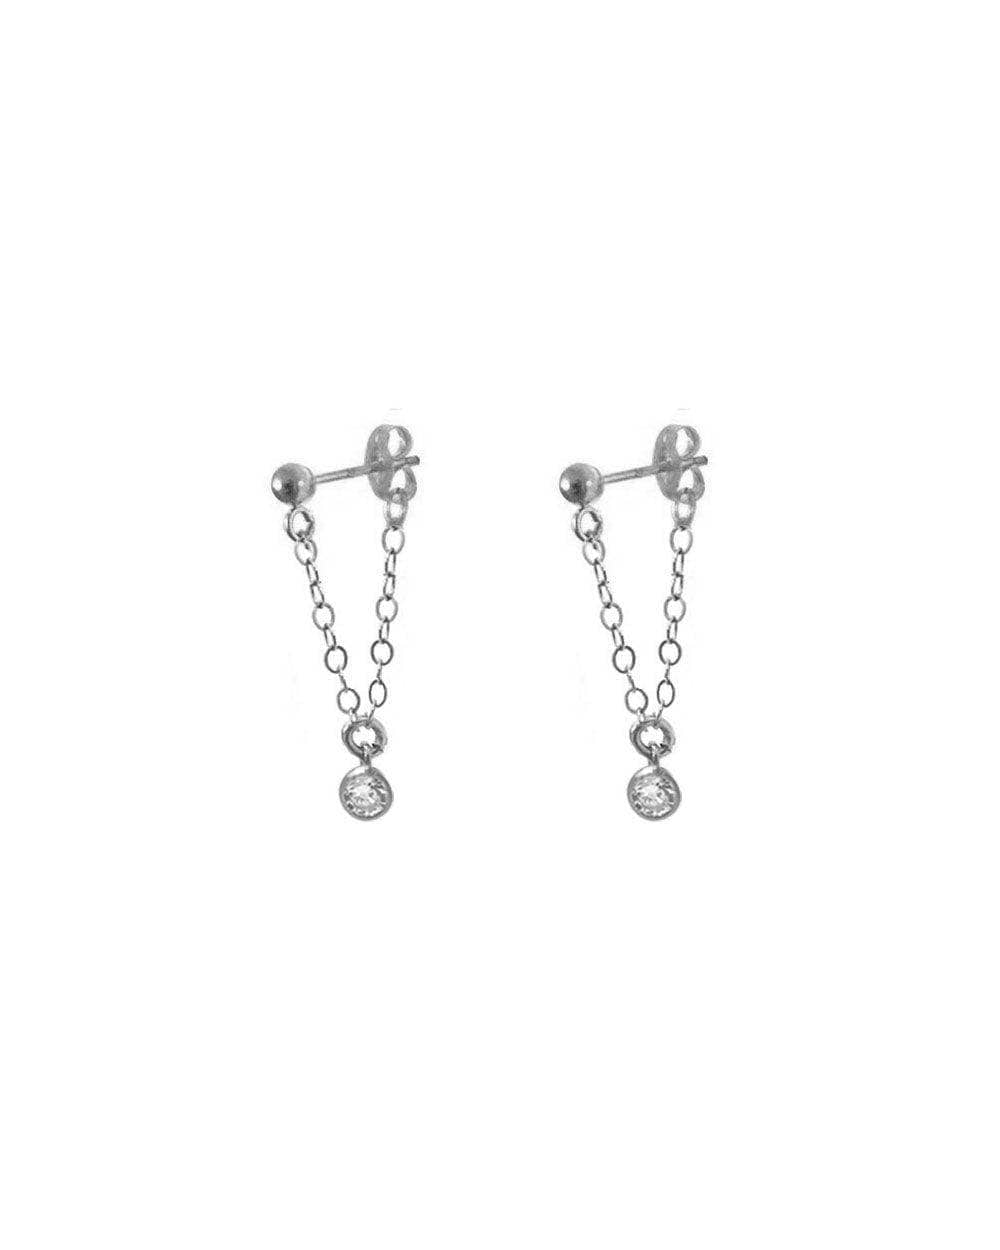 Dia Chained Stud Earrings